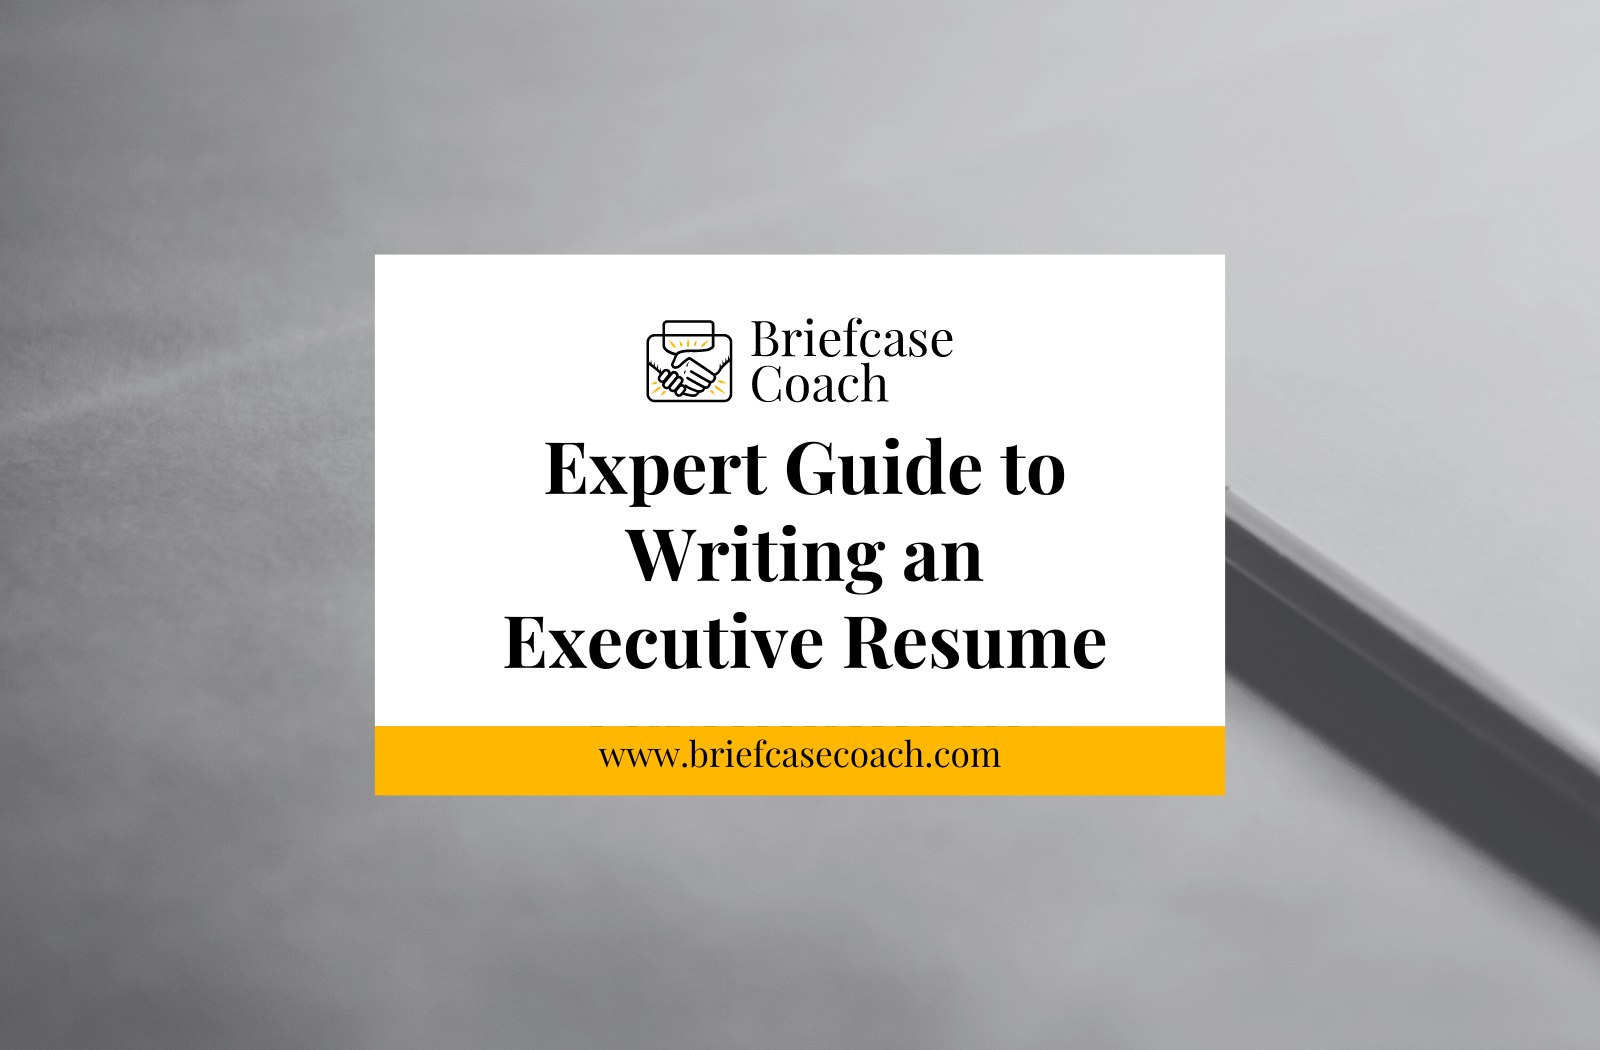 What Is the Best Professional Resume Format?